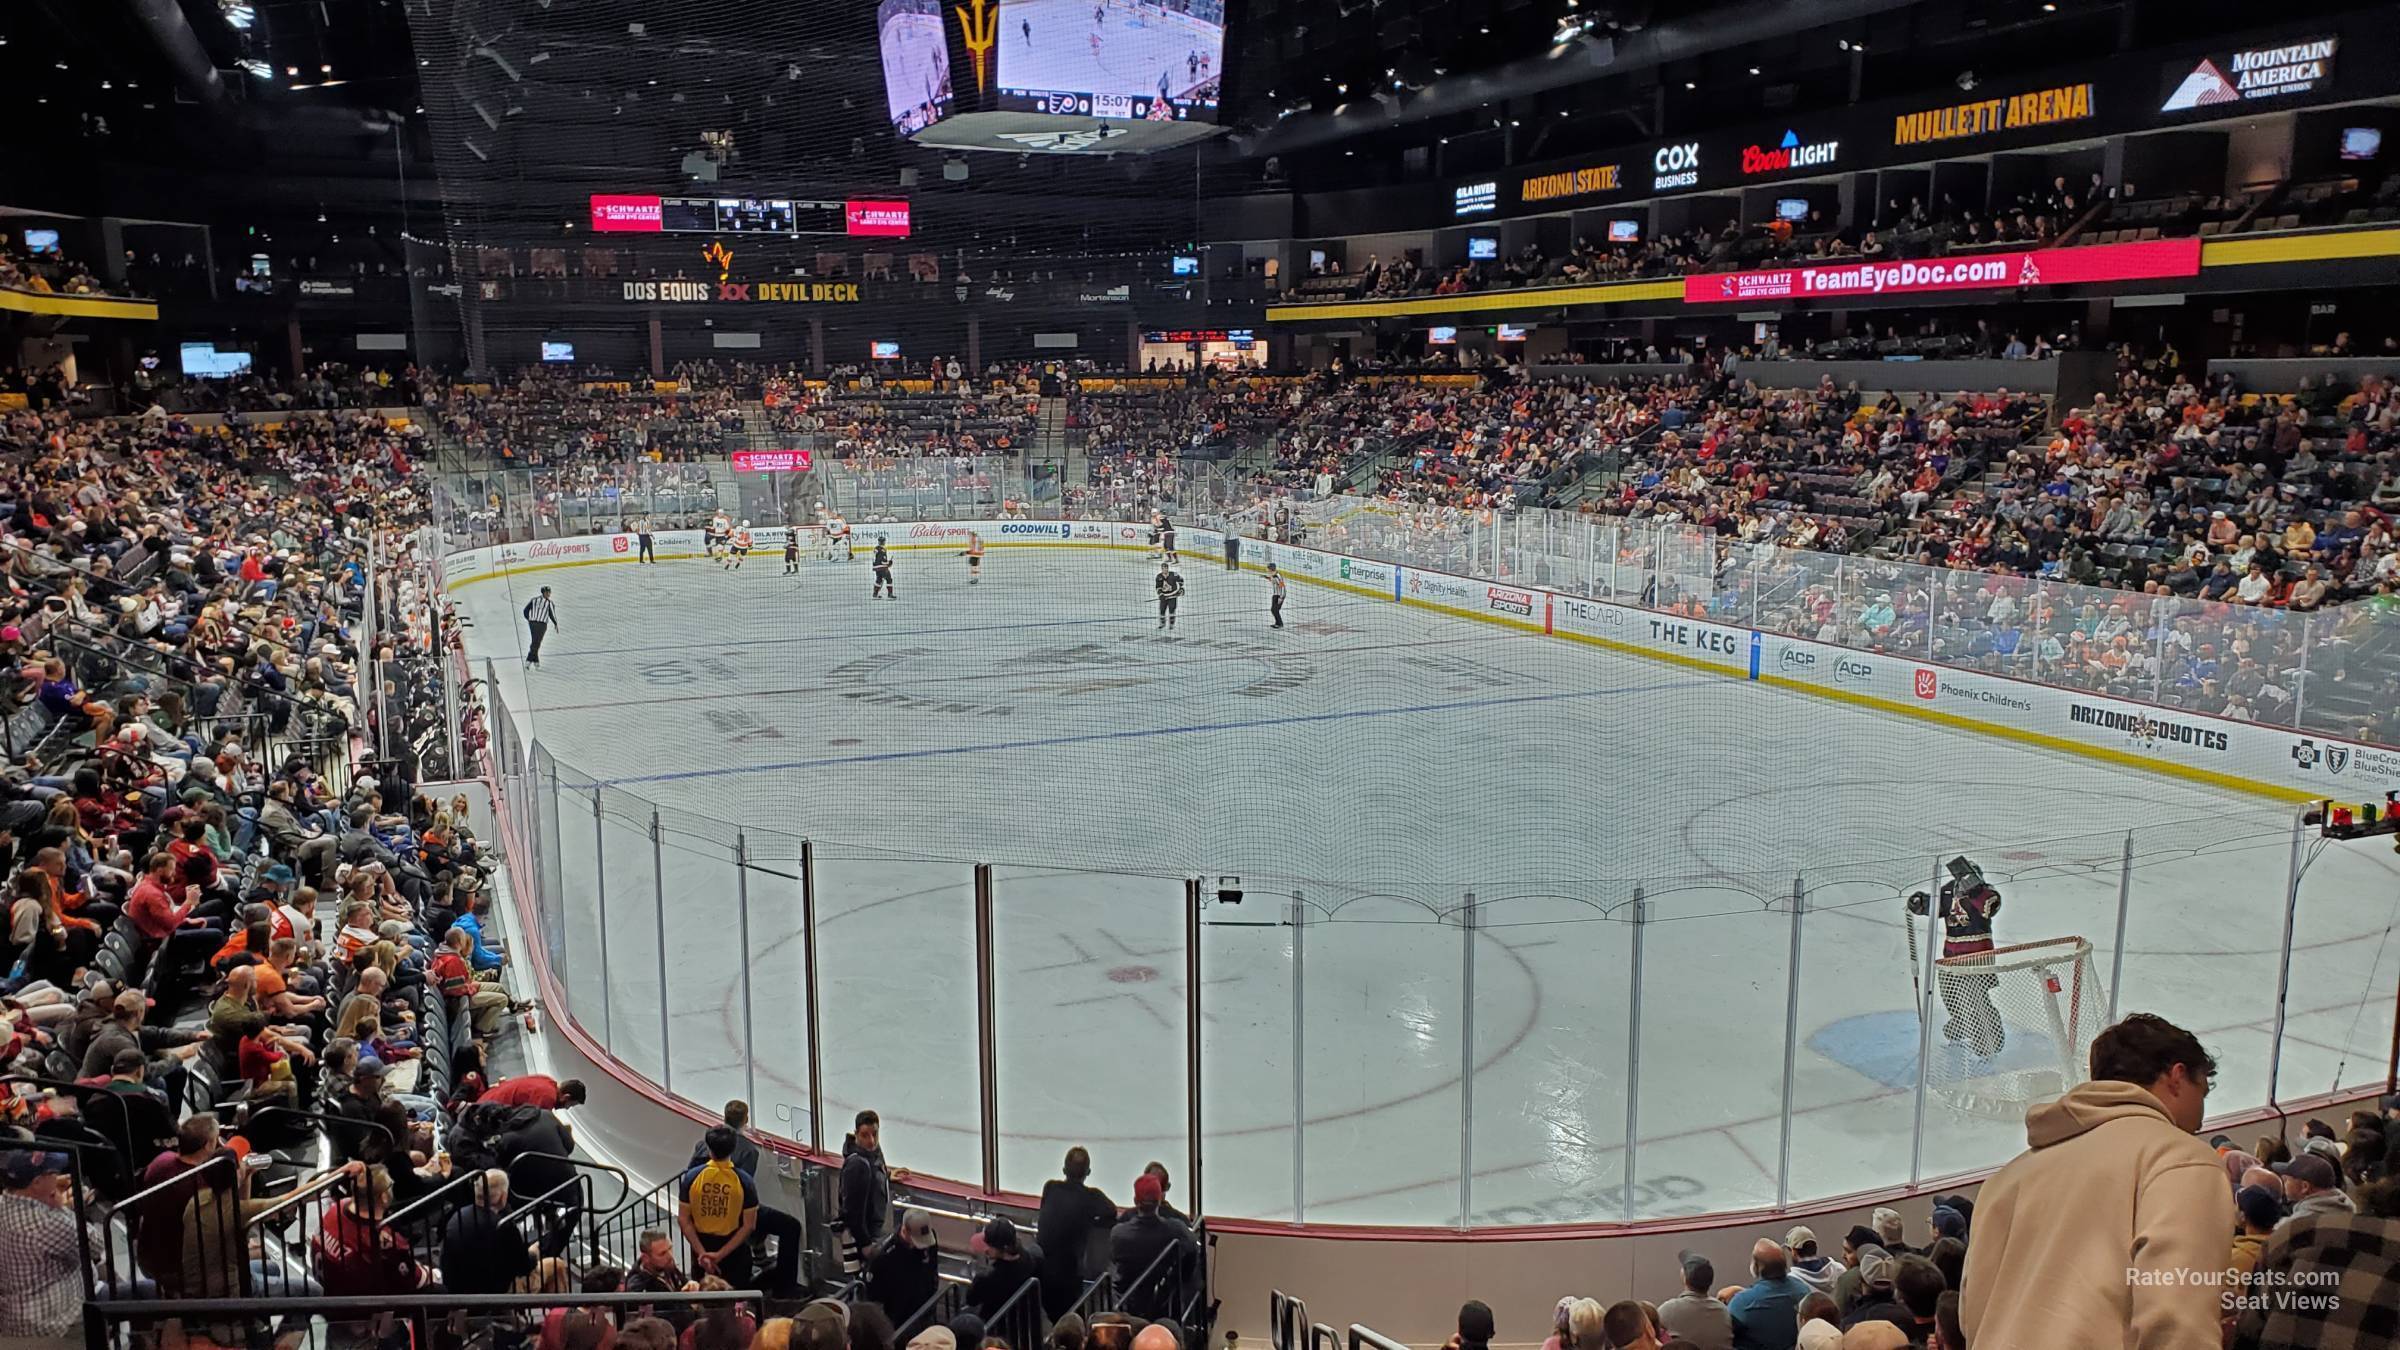 section 117, row sro seat view  - mullett arena